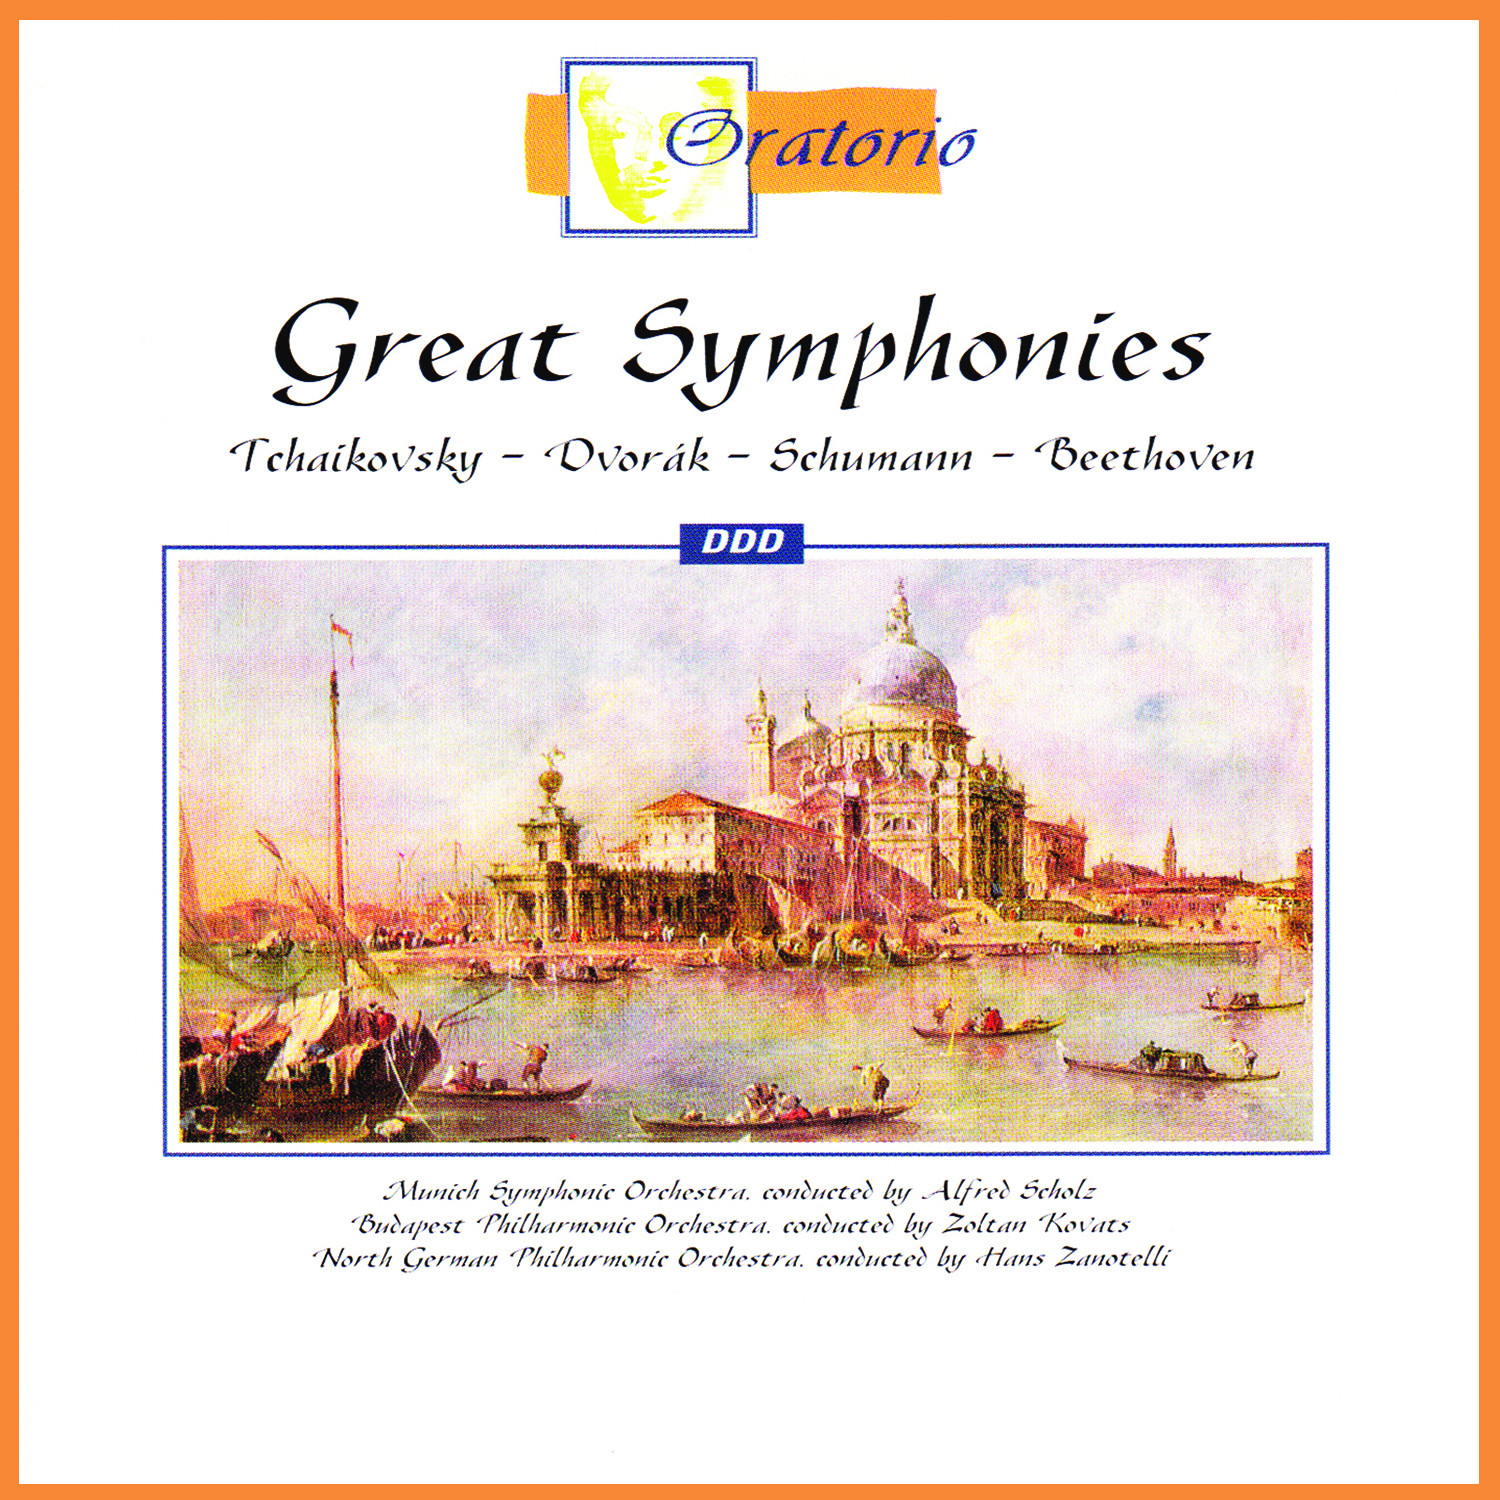 Symphony No.9 in D Minor, Op. 125: 'Choral' - Molto Vivace